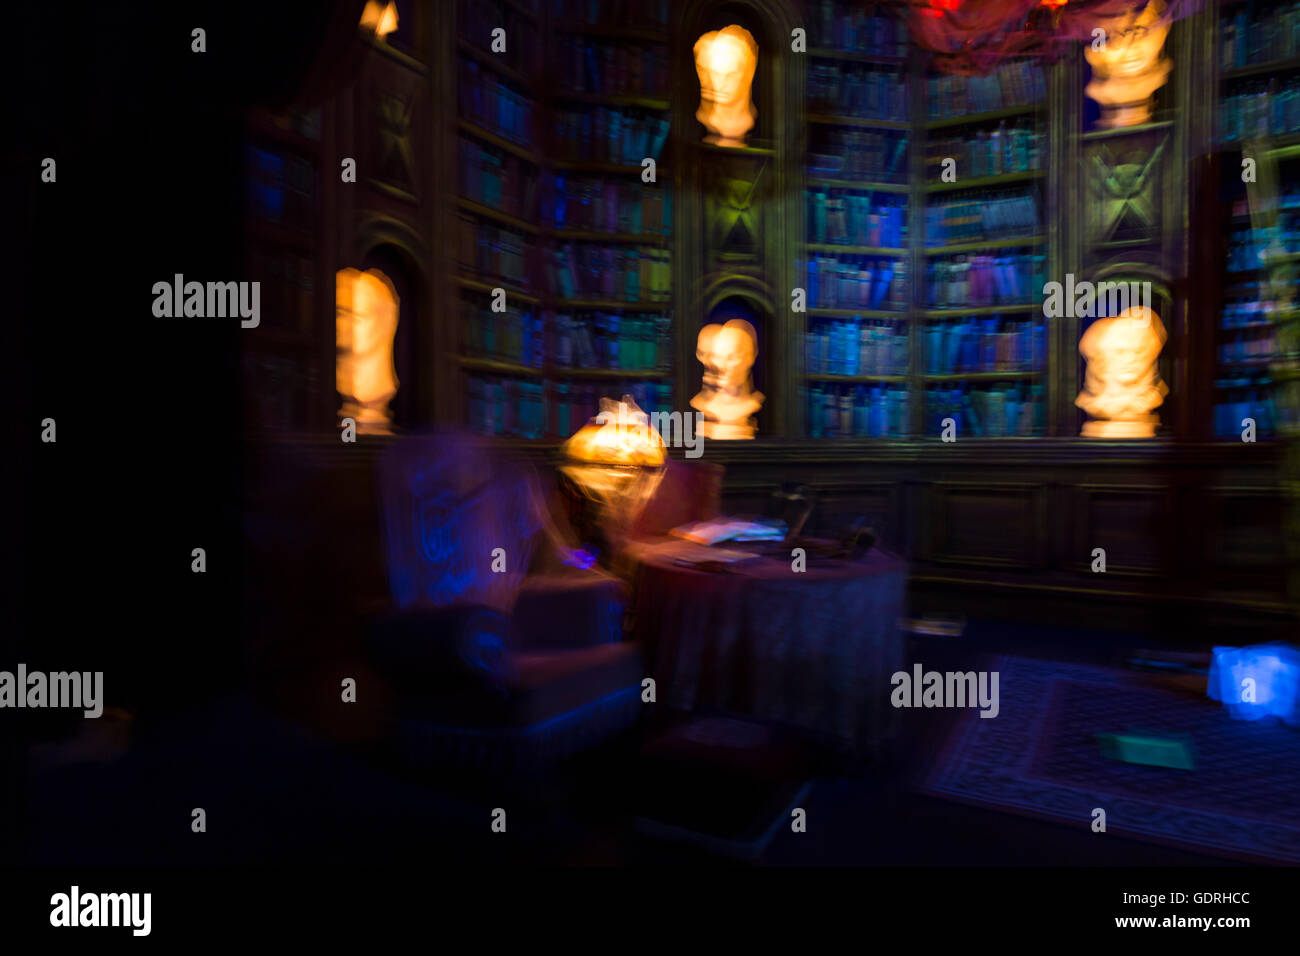 Colorful blurred image symbolizing dreams, nightmares and ghostly apparitions. View on an imaginary library with book shelves Stock Photo